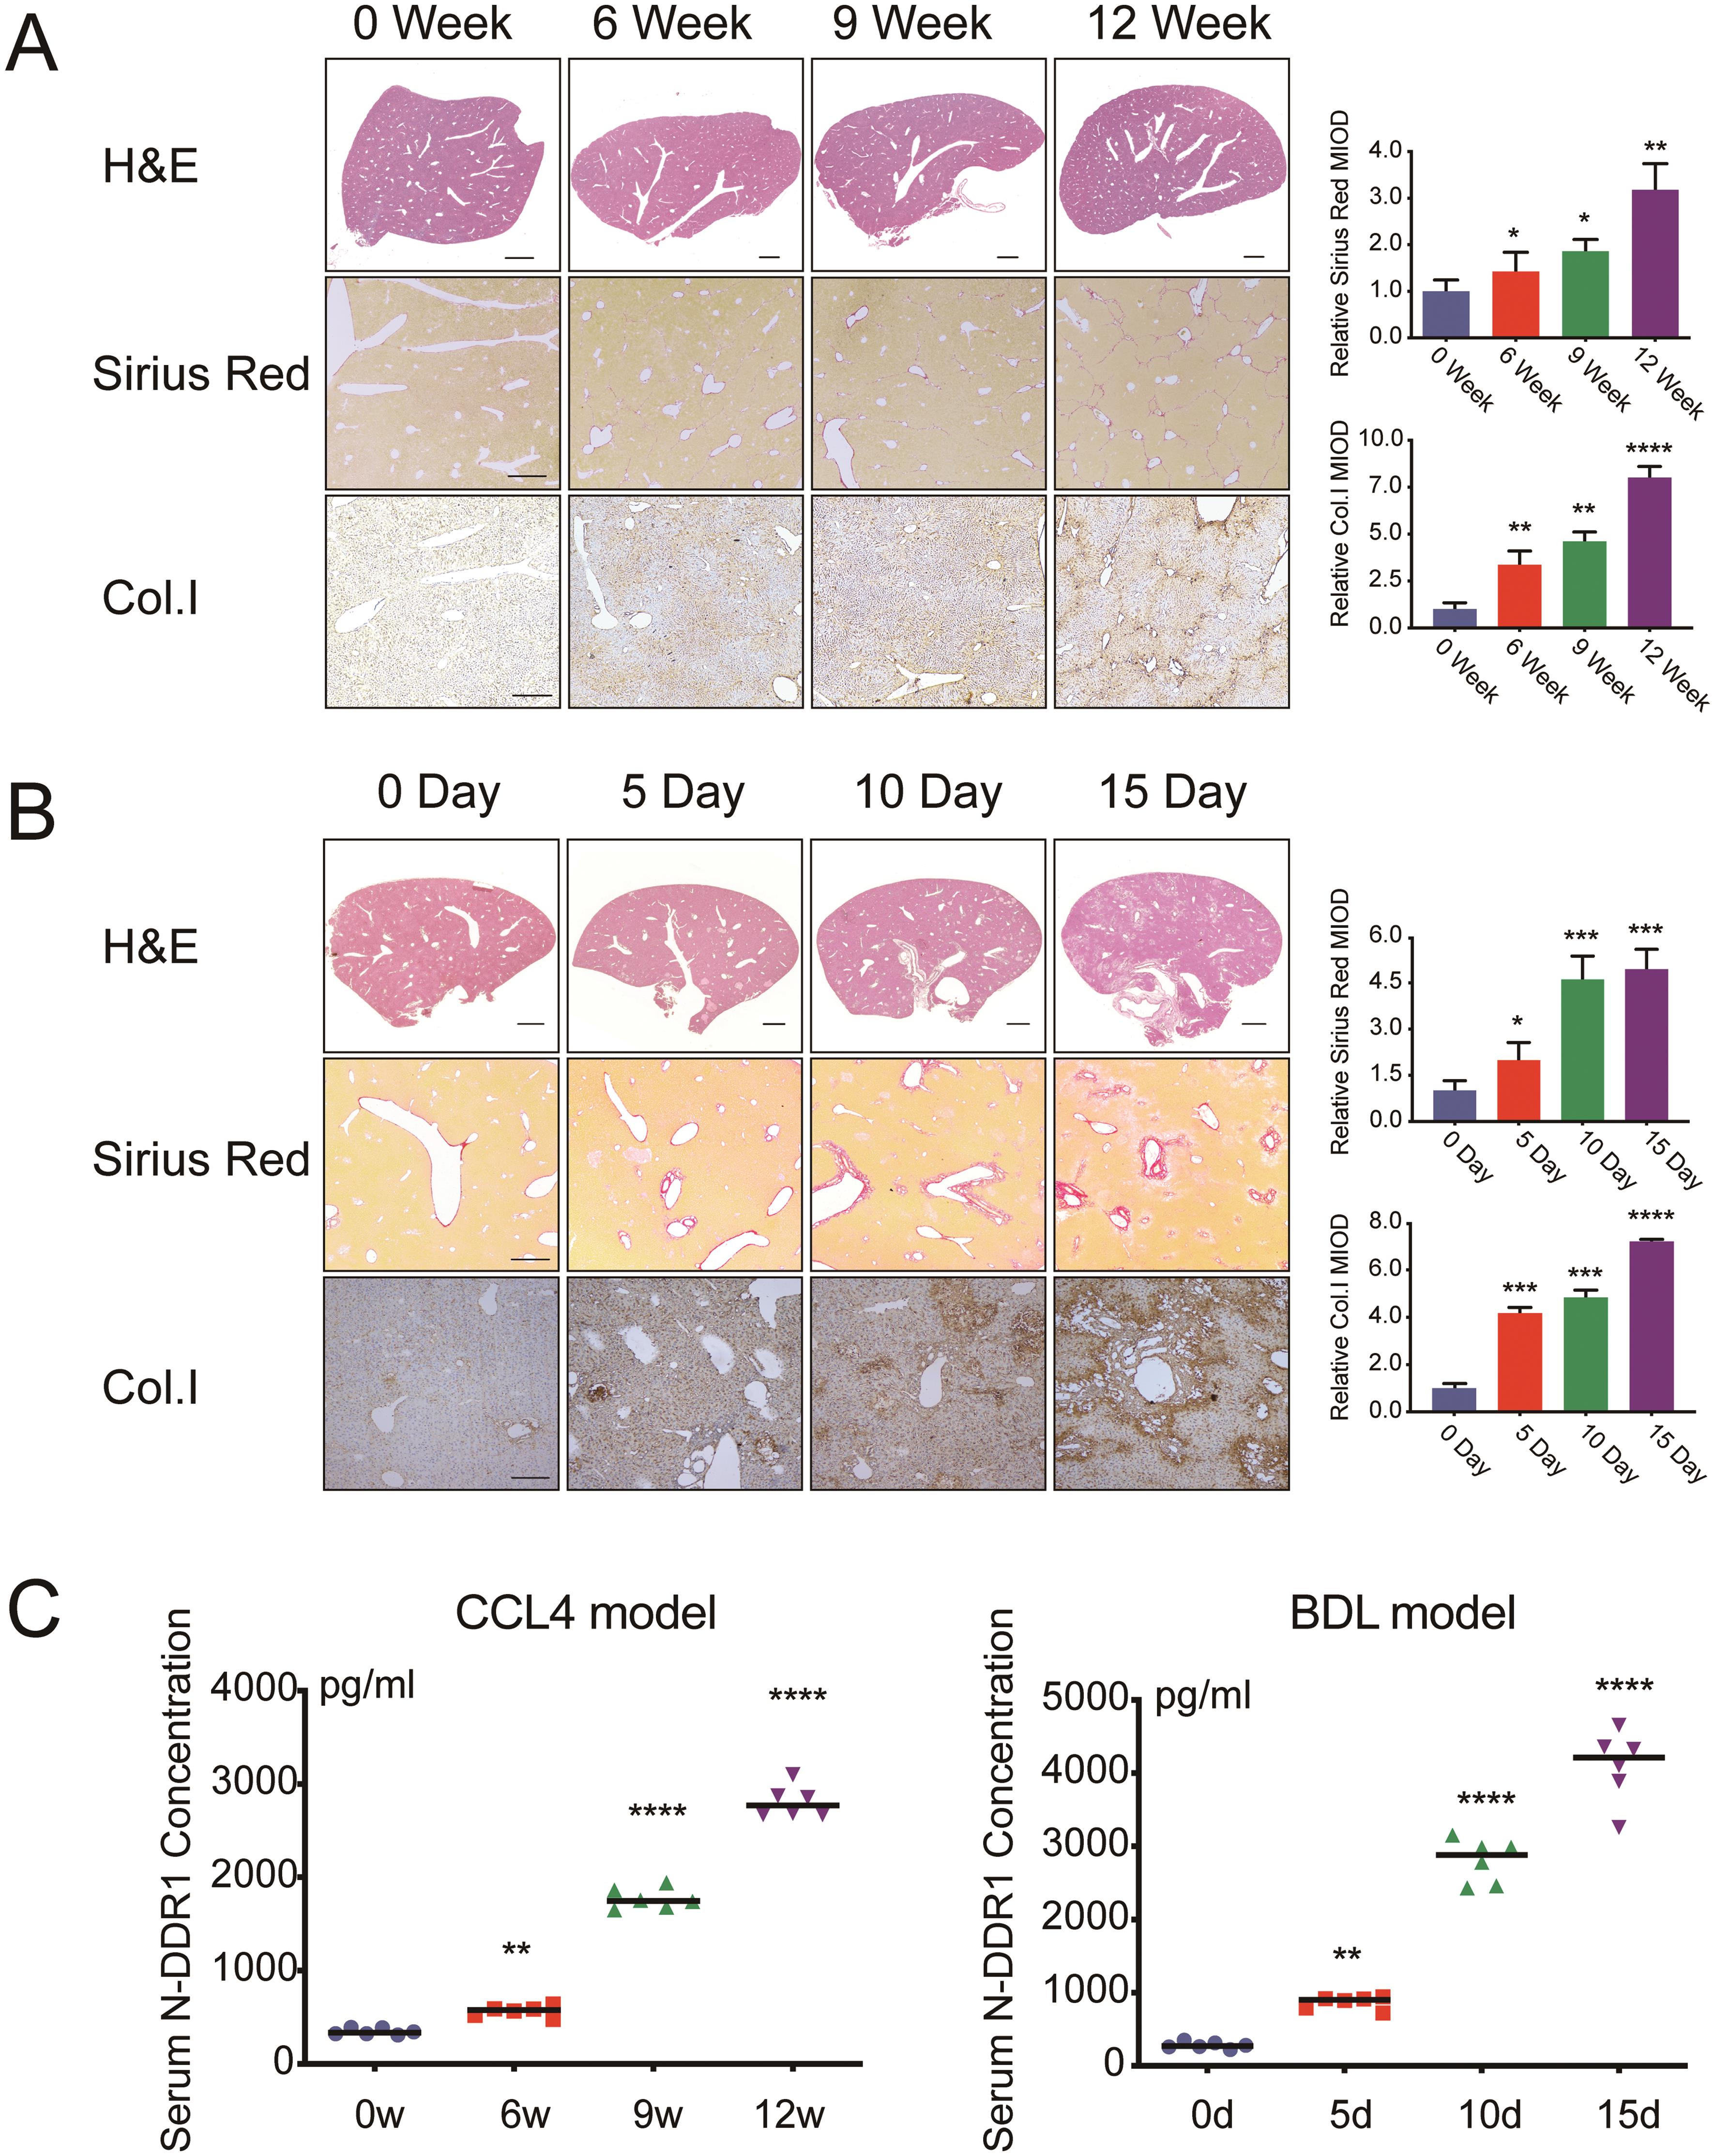 Type I collagen deposition and serum N-terminal DDR1 in the CCl4-induced and BDL mouse model.